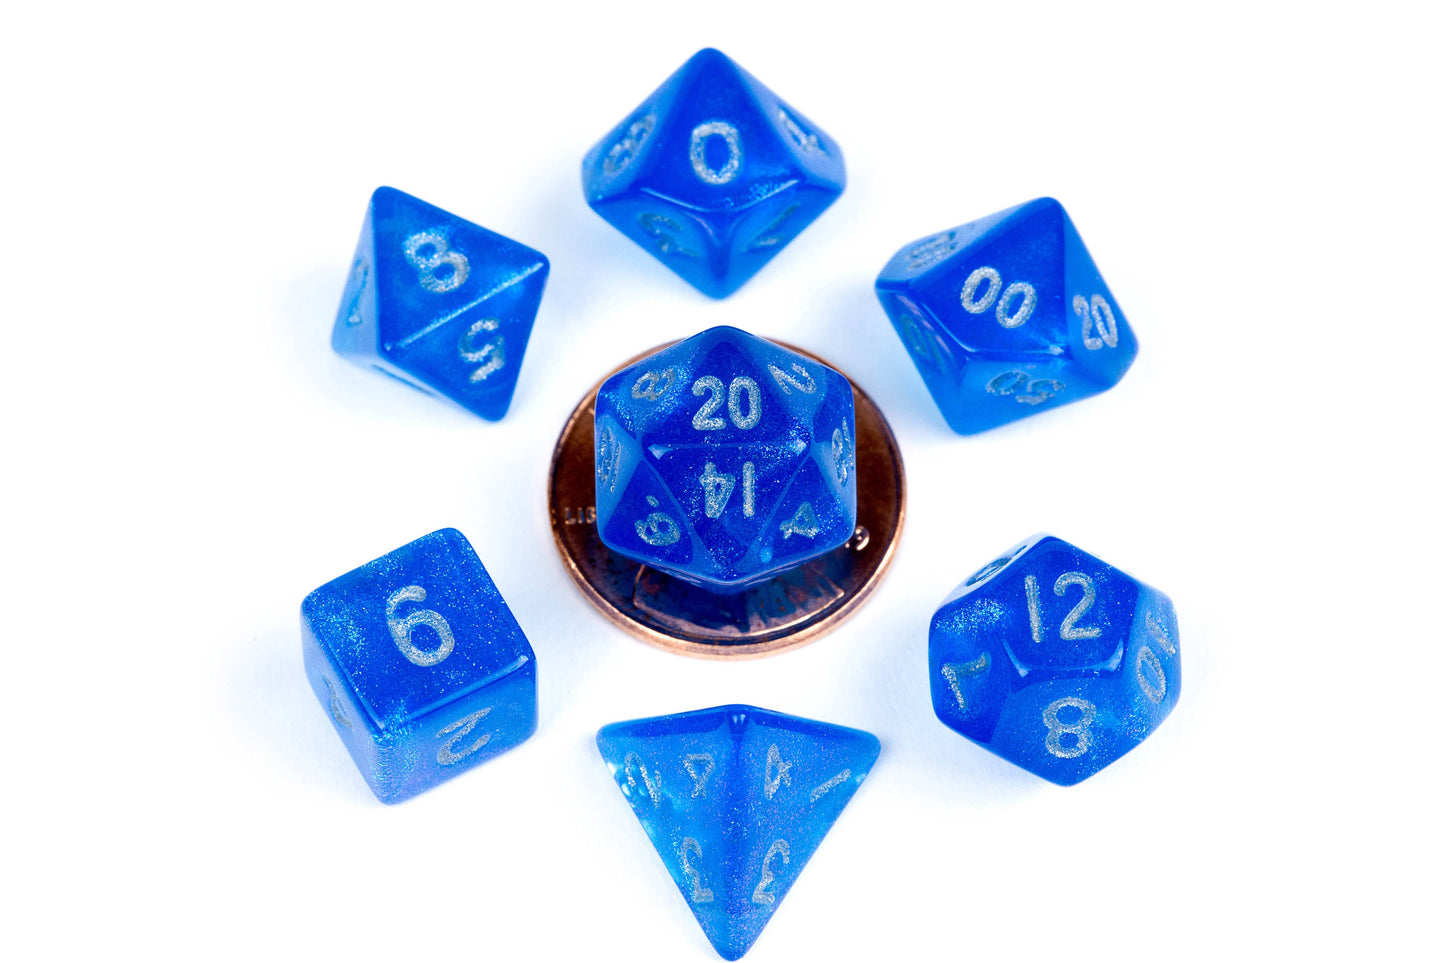 10mm Mini Acrylic Polyhedral Set - Stardust Blue w/Silver Numbers 4181